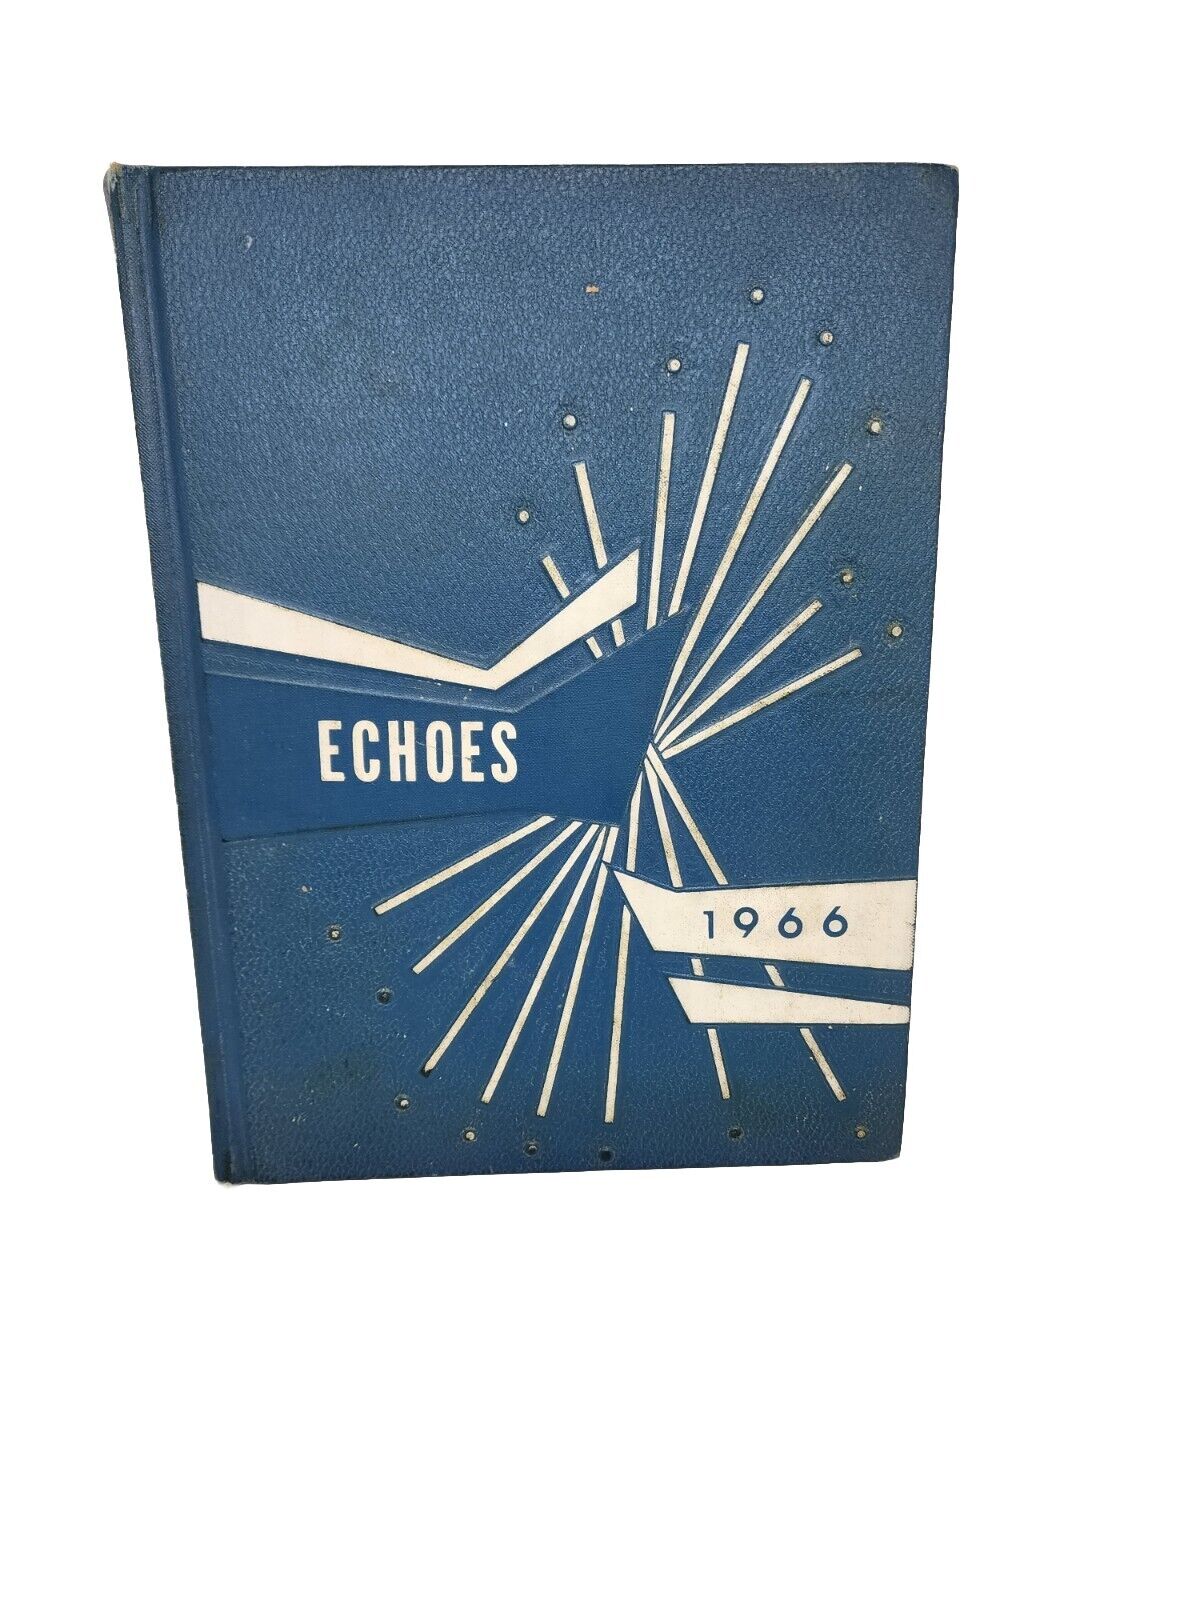 South Tippah High School 1966 Echoes Yearbook.  Ripley, Mississippi Vintage 60\'s